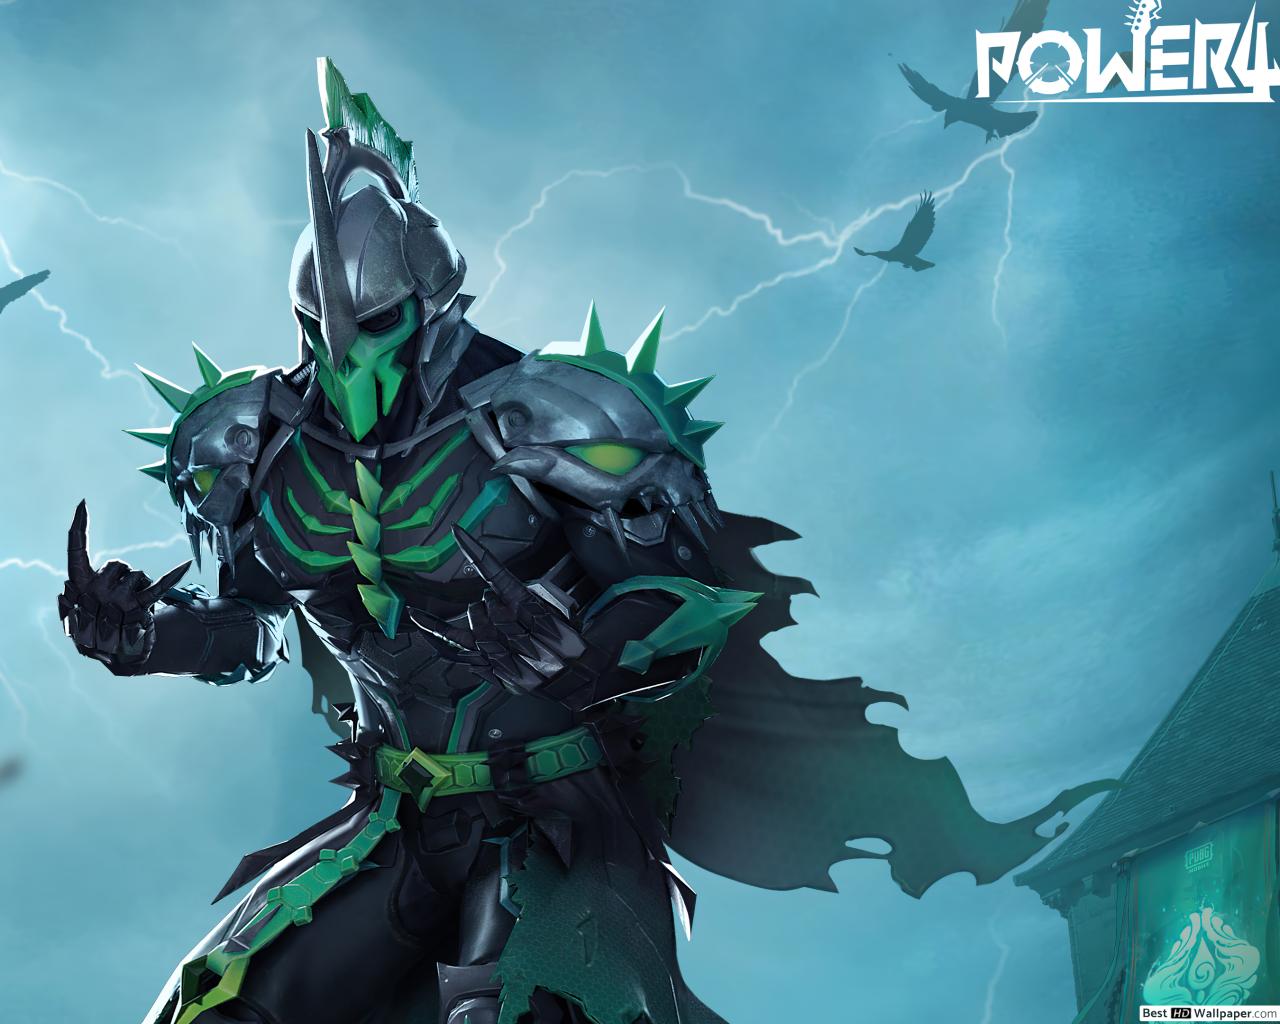 Rogue Lords Wallpapers